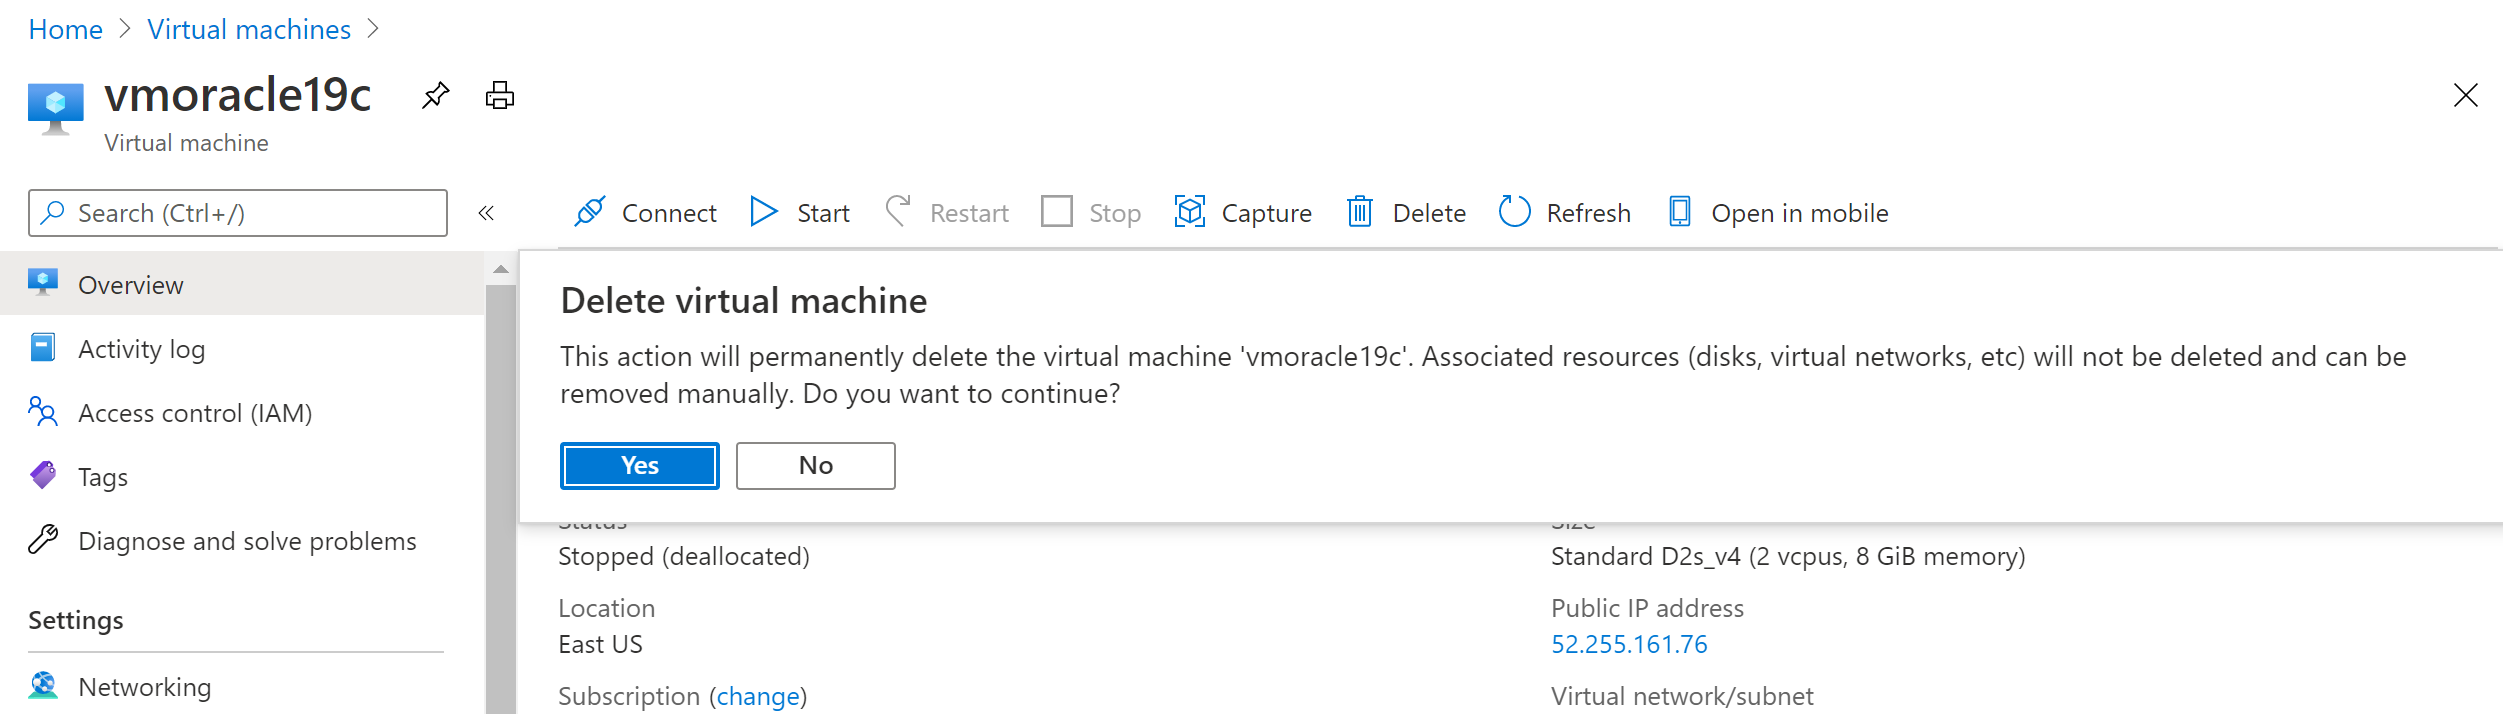 Screenshot that shows the confirmation message for deleting a virtual machine.